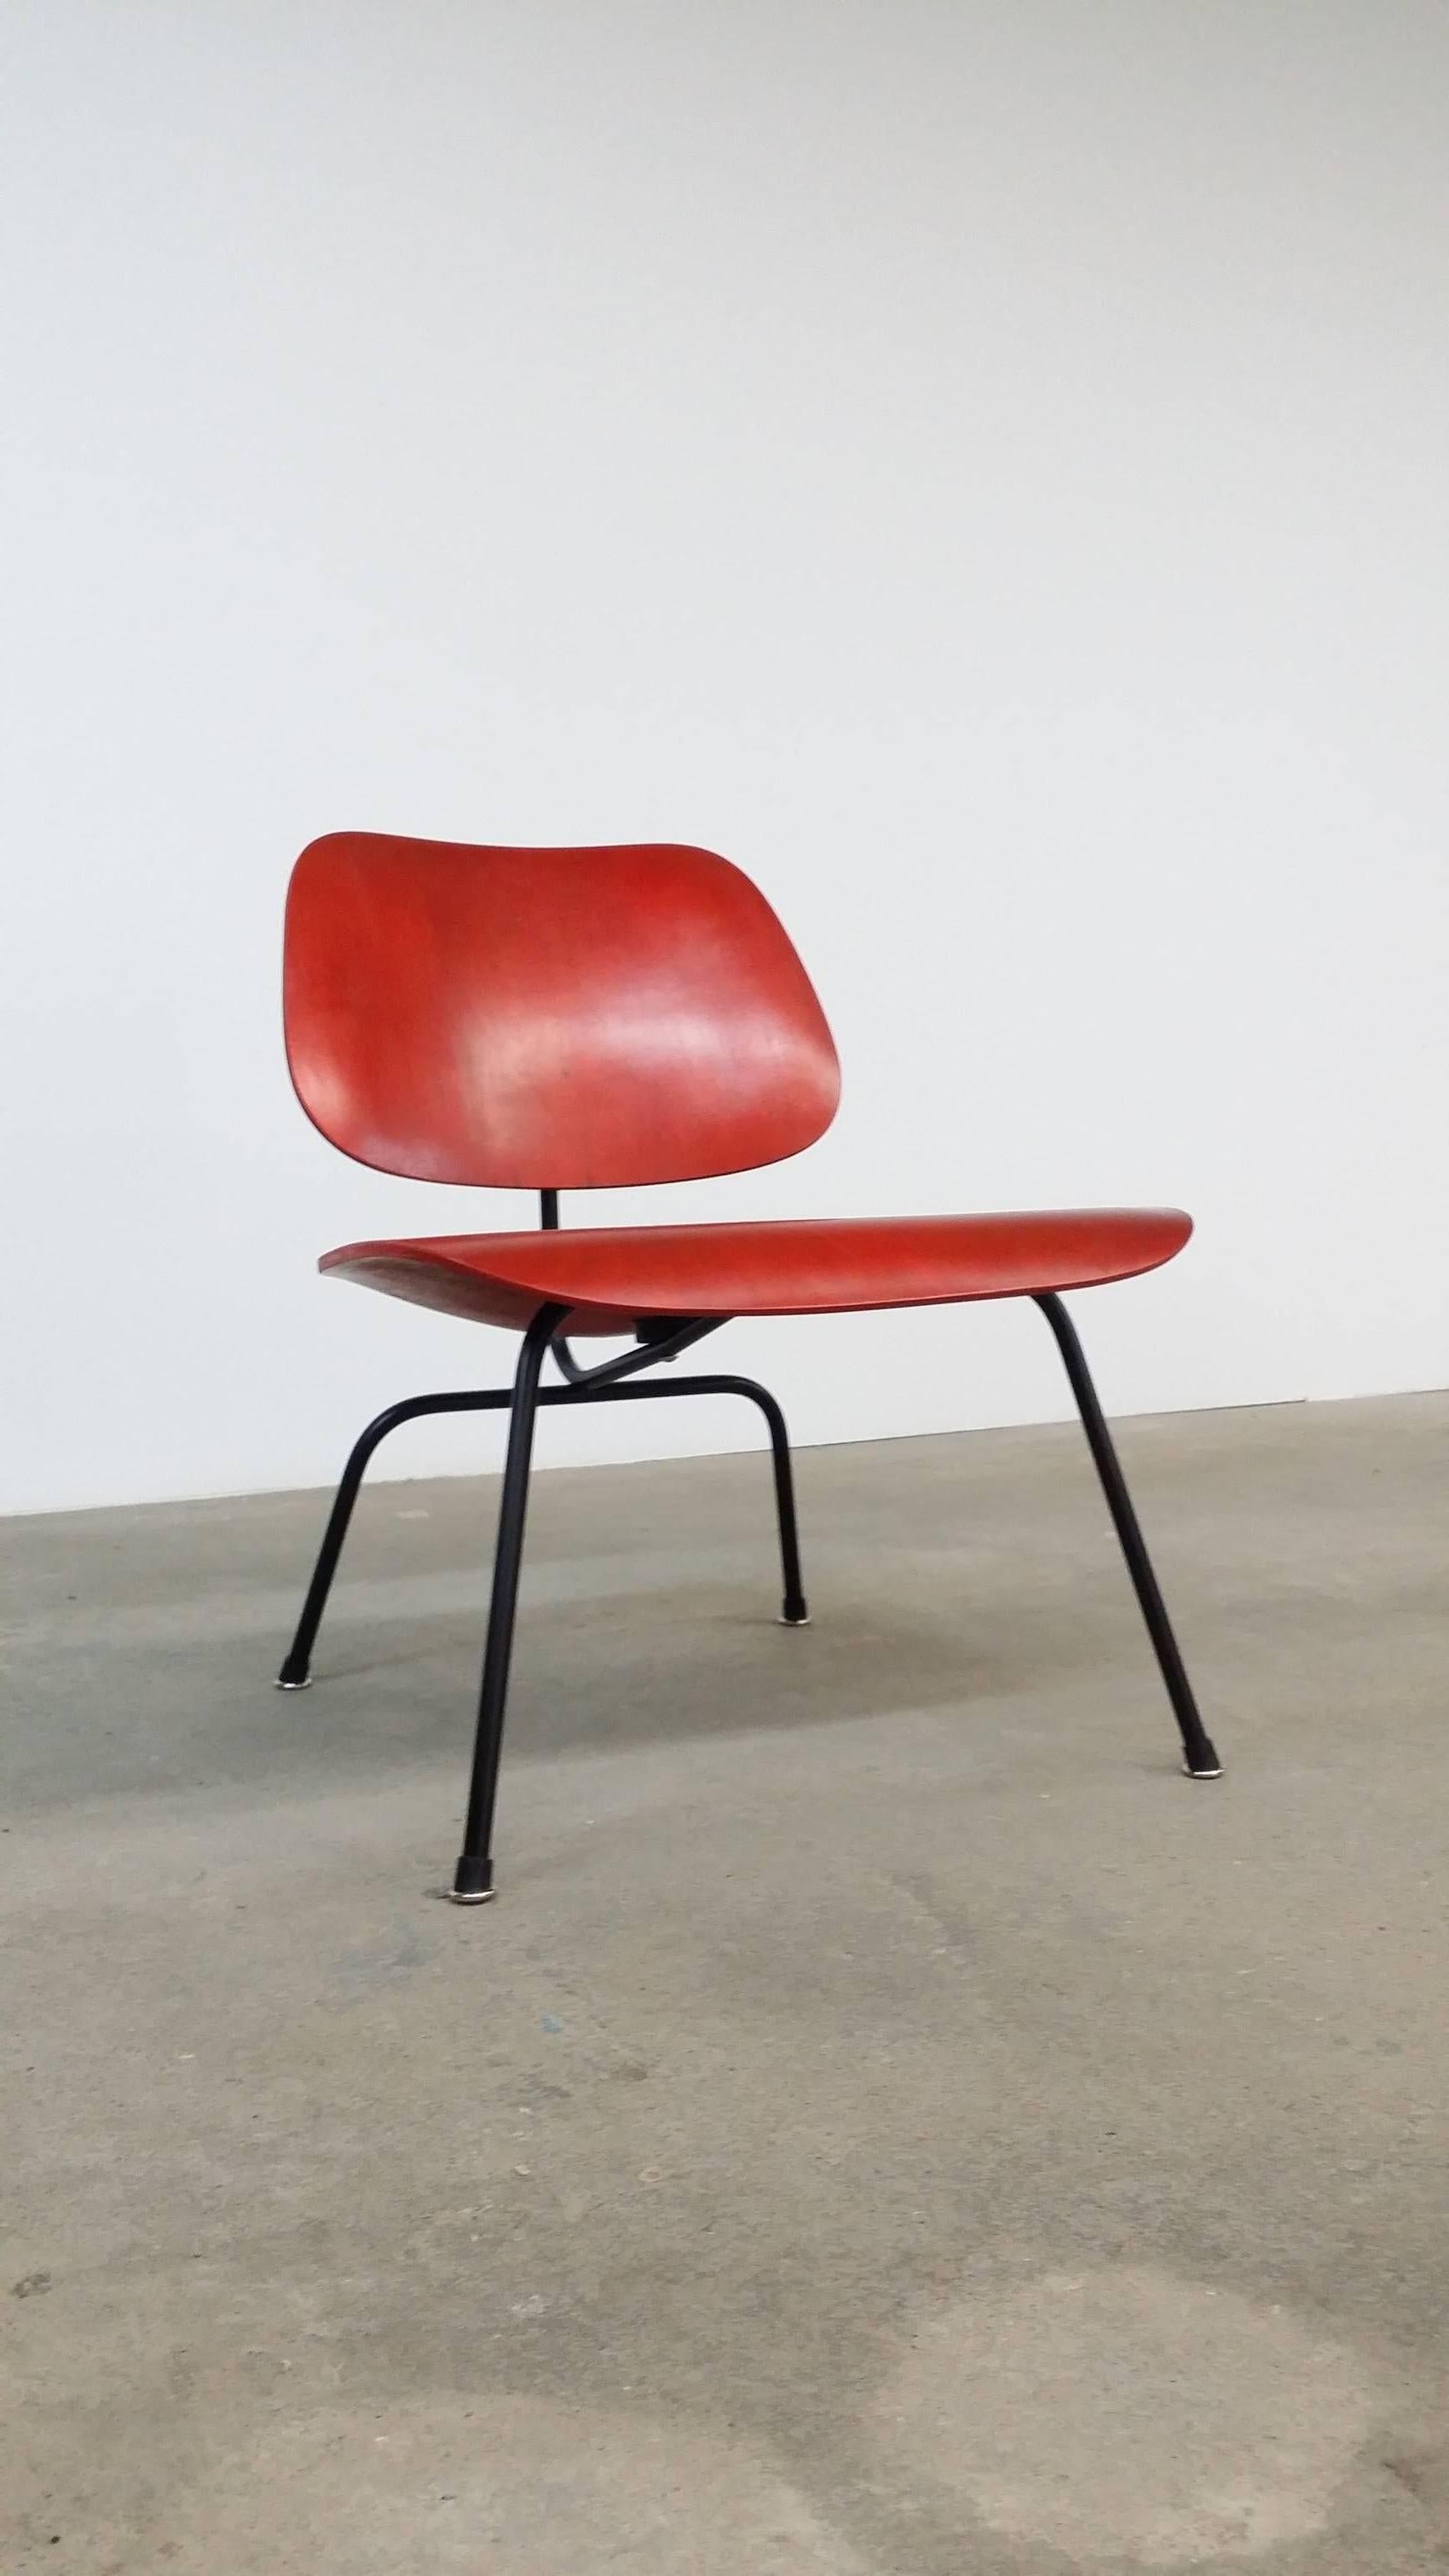 Fully Restored Early Red Aniline Dye Eames LCM 3